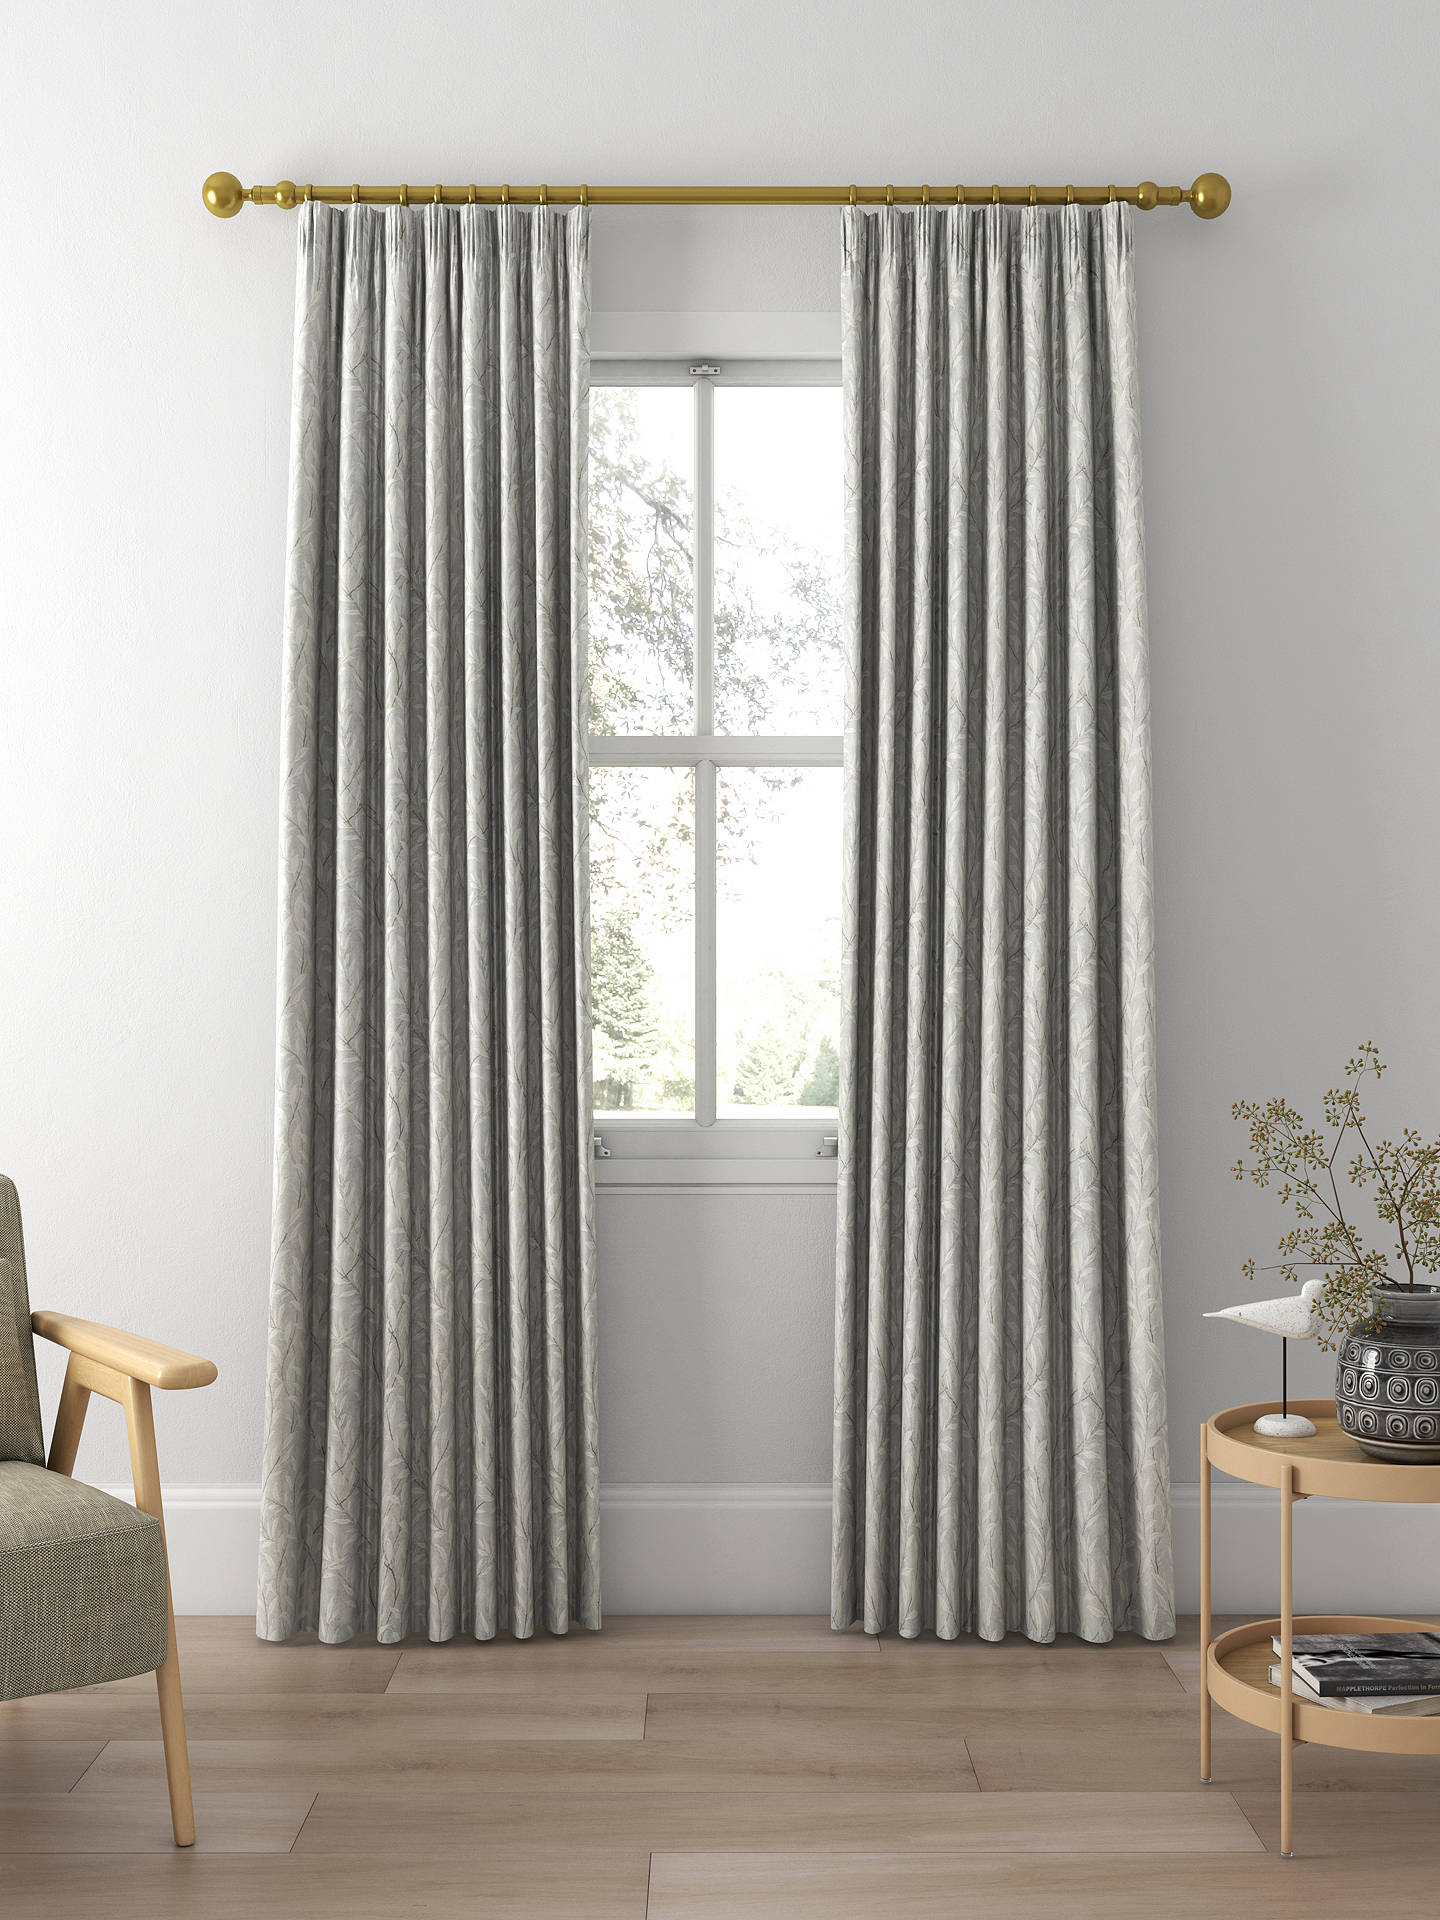 Sanderson Osier Made to Measure Curtains, Dove/Grey